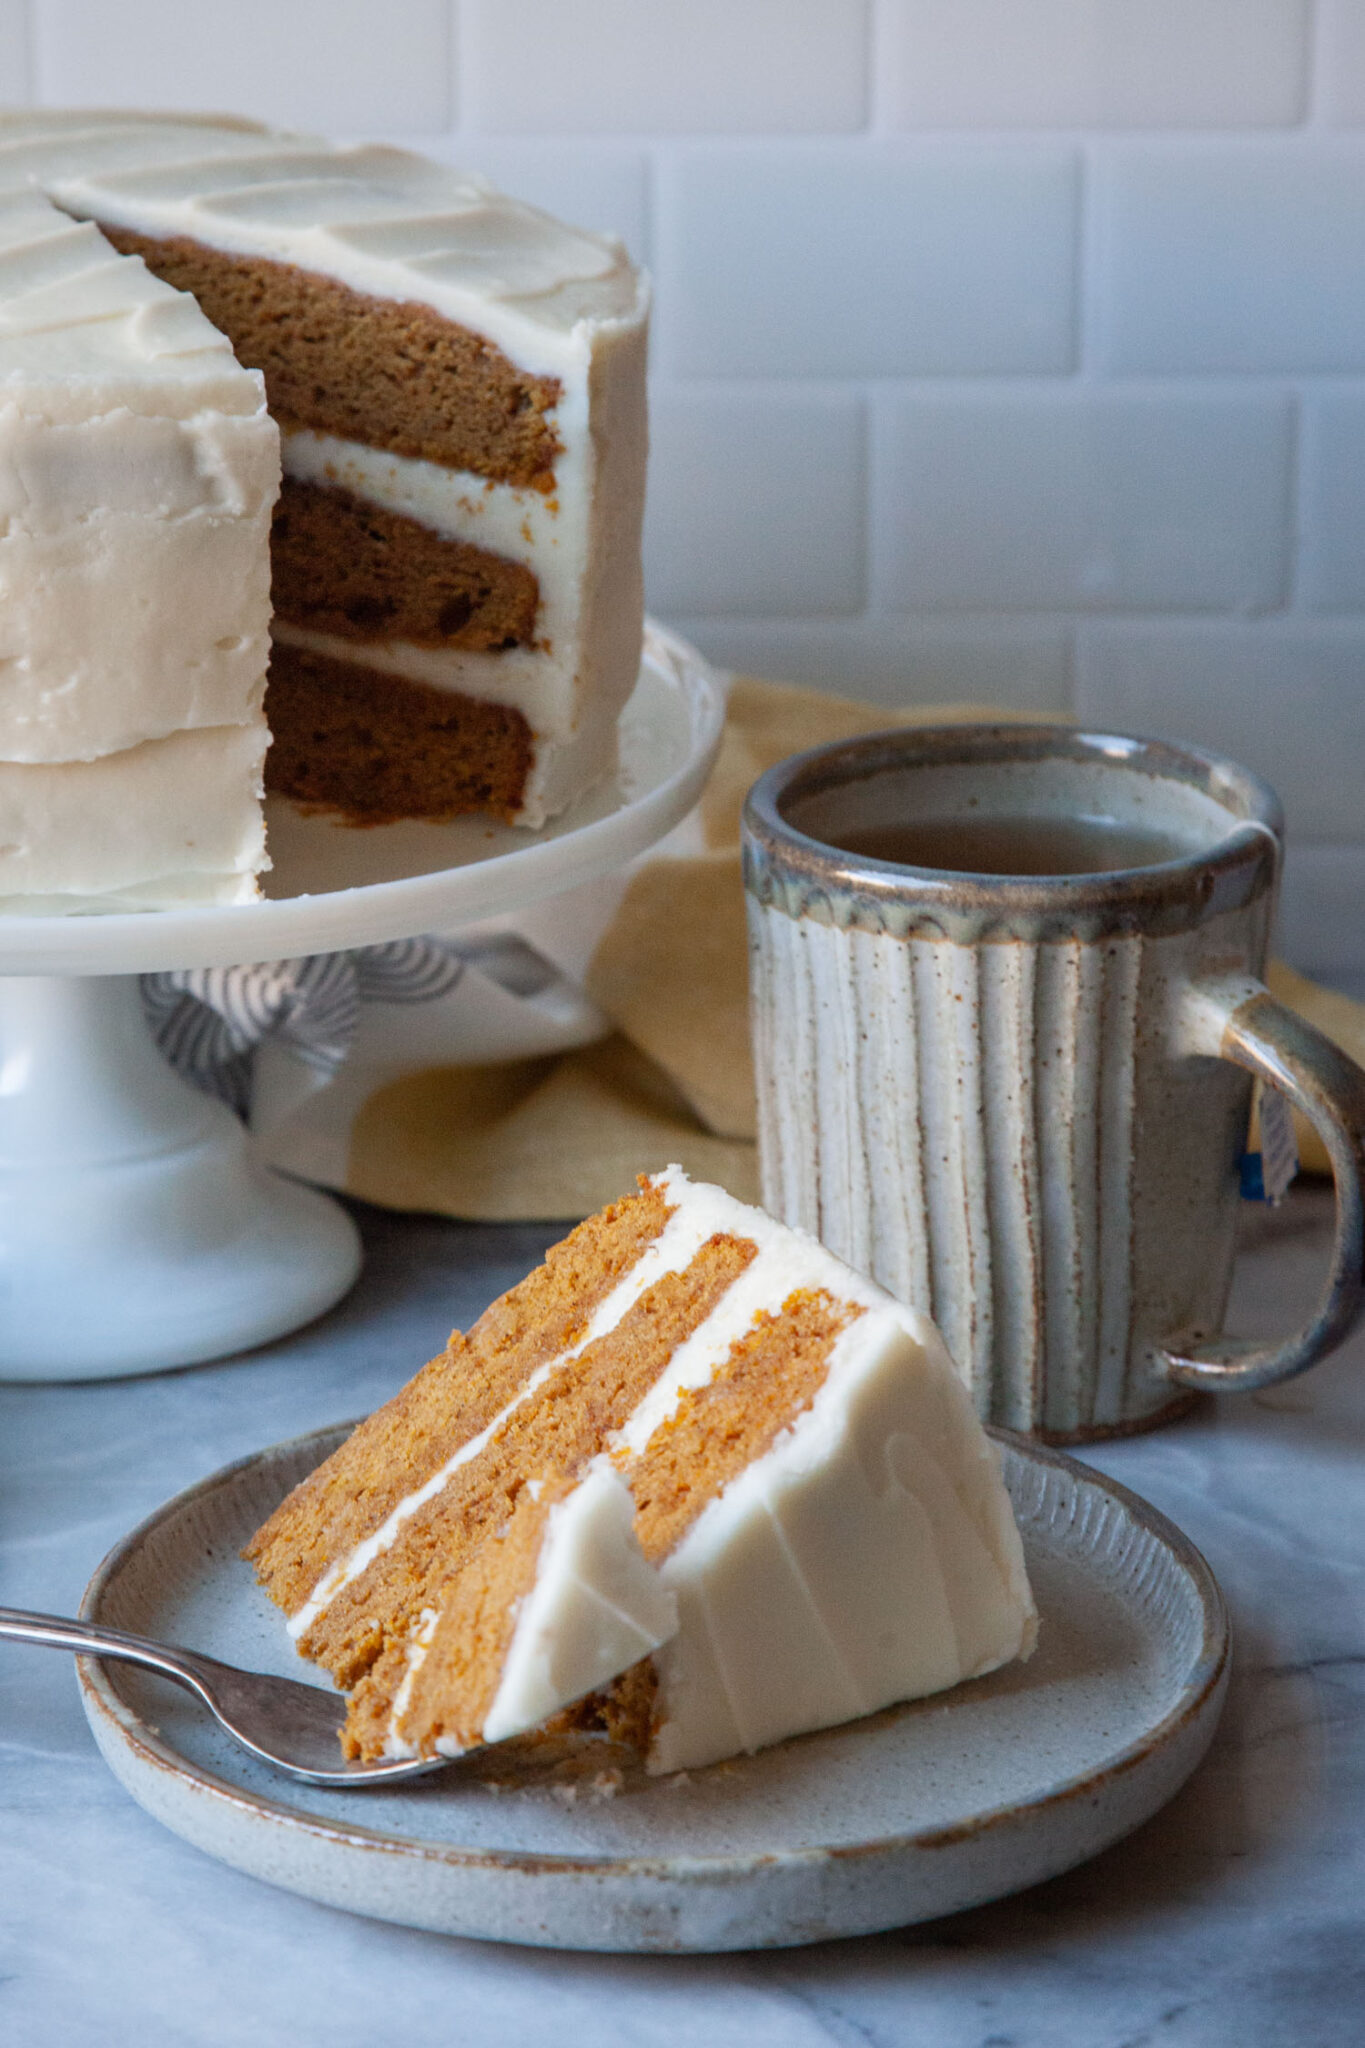 A slice of pumpkin layer cake on a plate, with a fork that has taken a bite size piece out of the slice. Behind the plate is the remaining cake on a cake stand and a mug of tea.